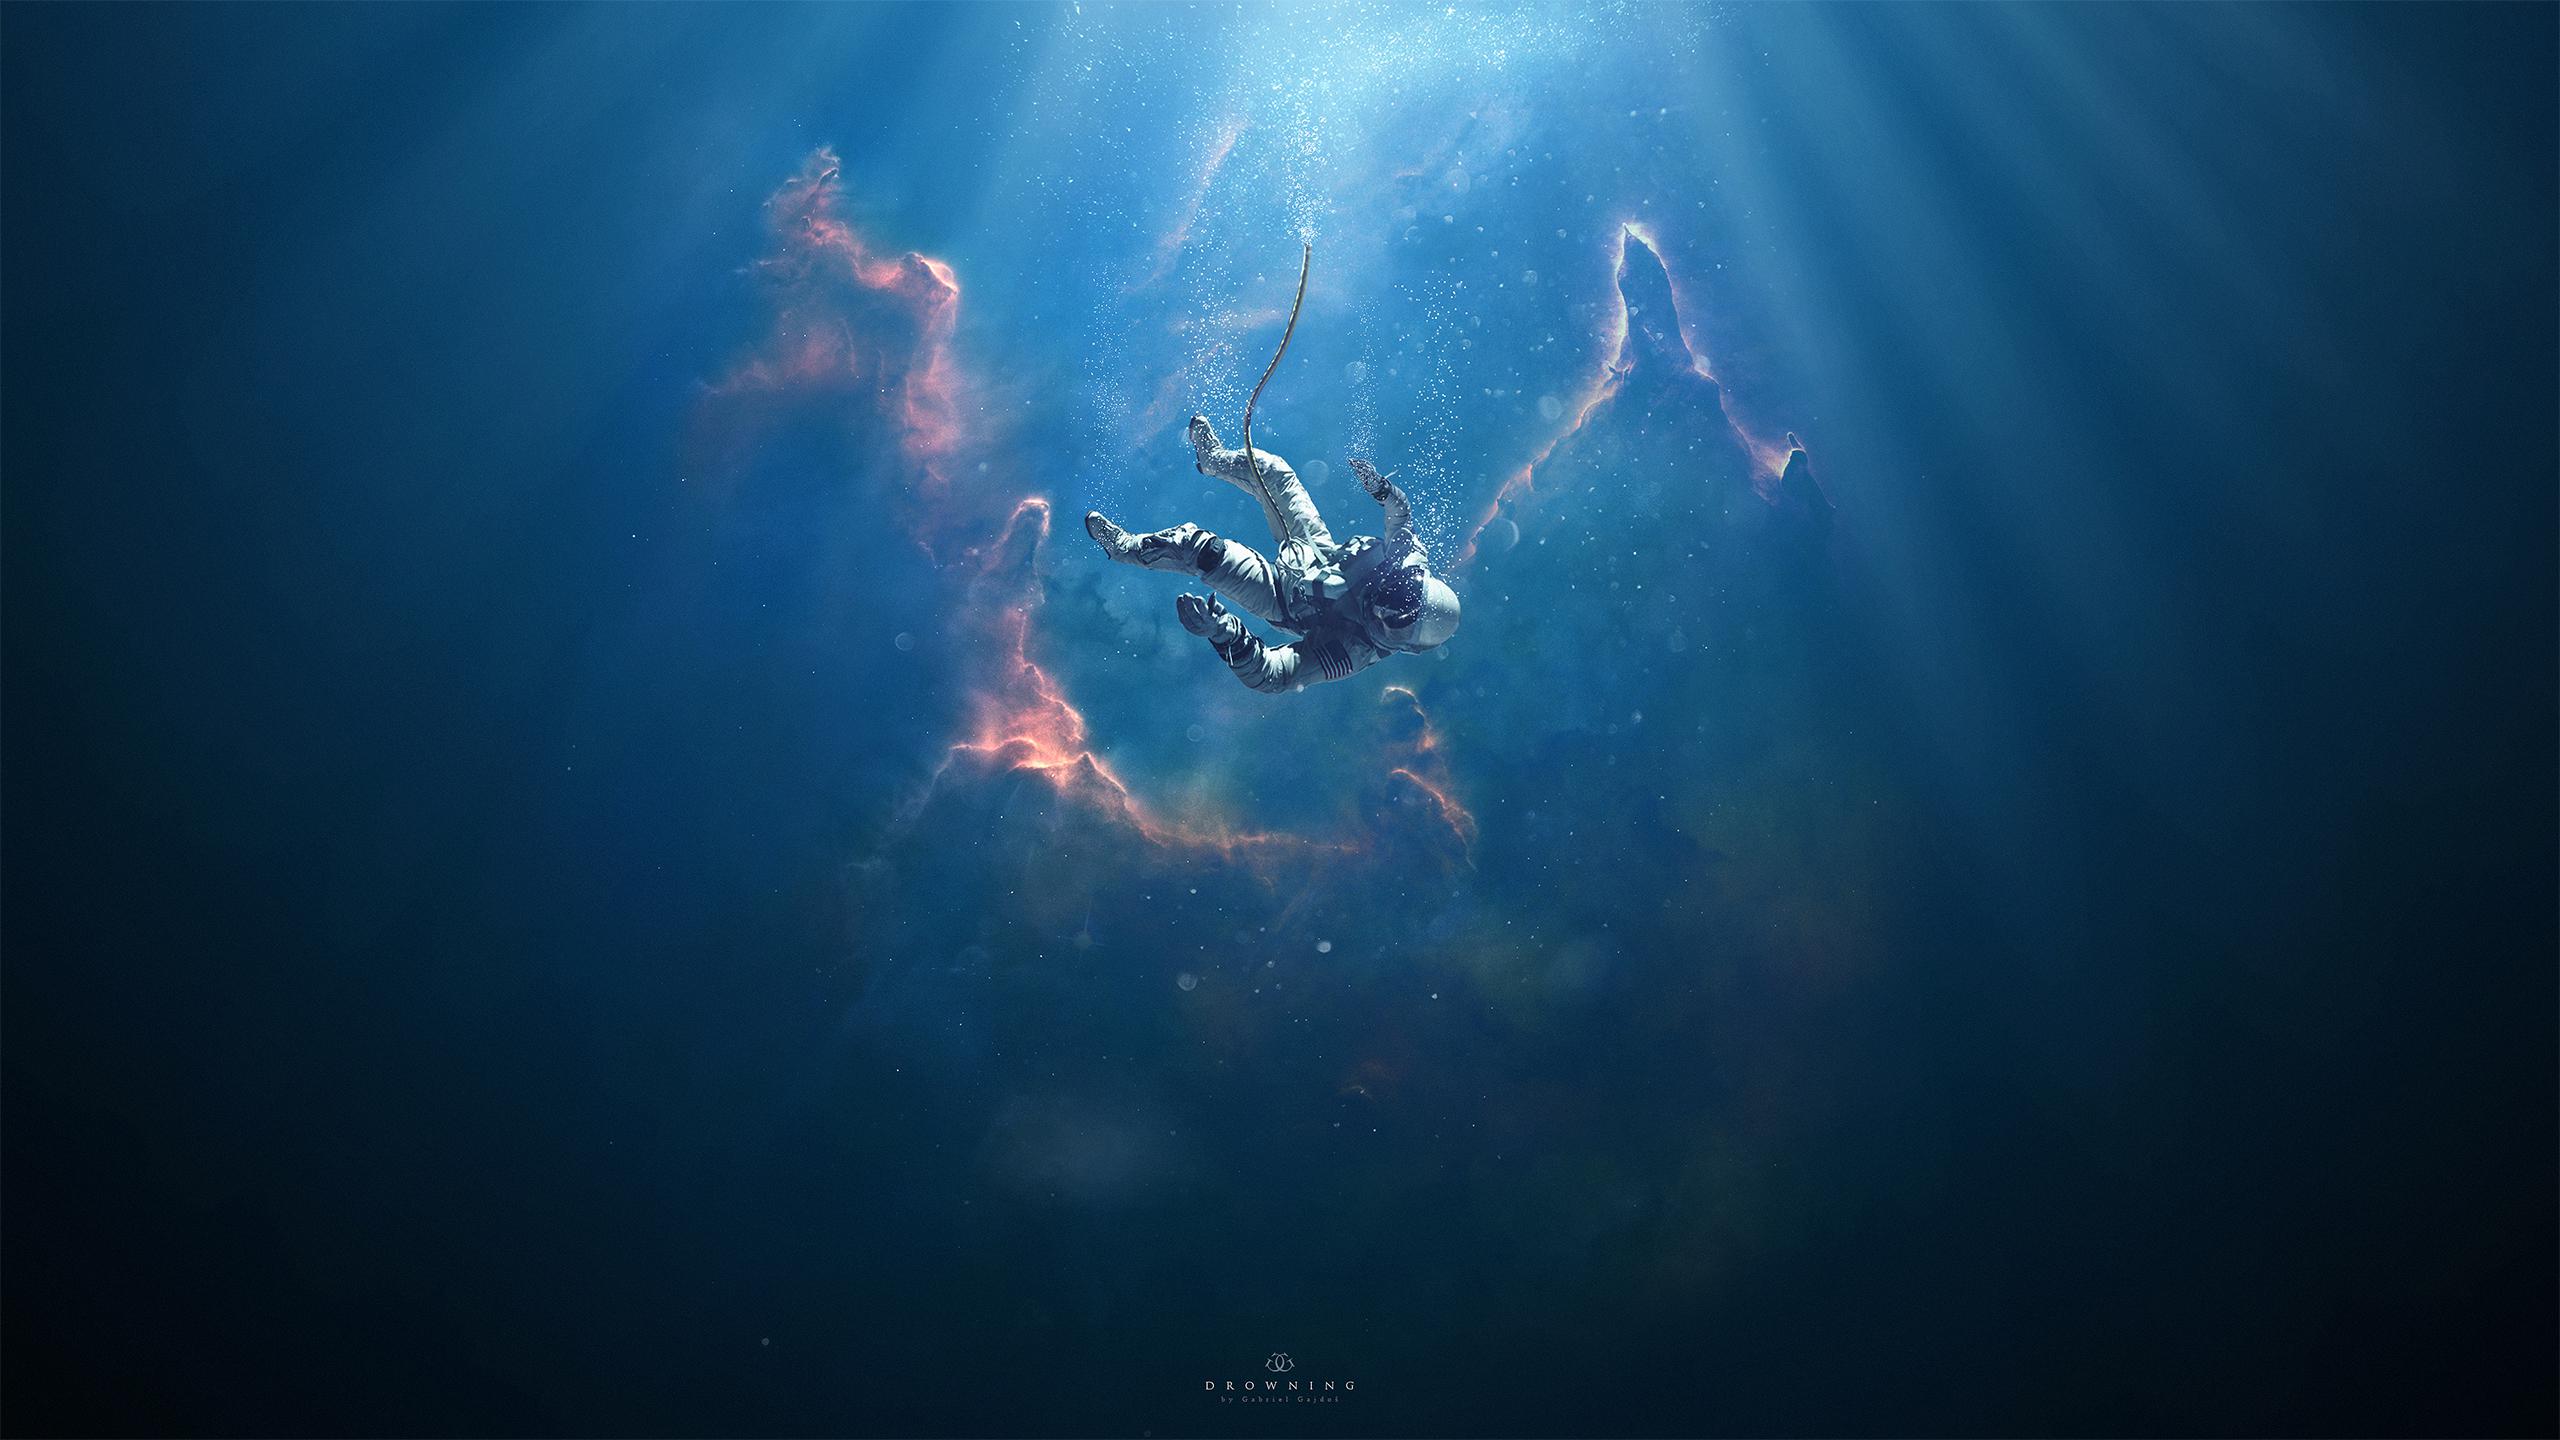 Floating in space Live Wallpaper  2160x2160  Rare Gallery HD Live  Wallpapers